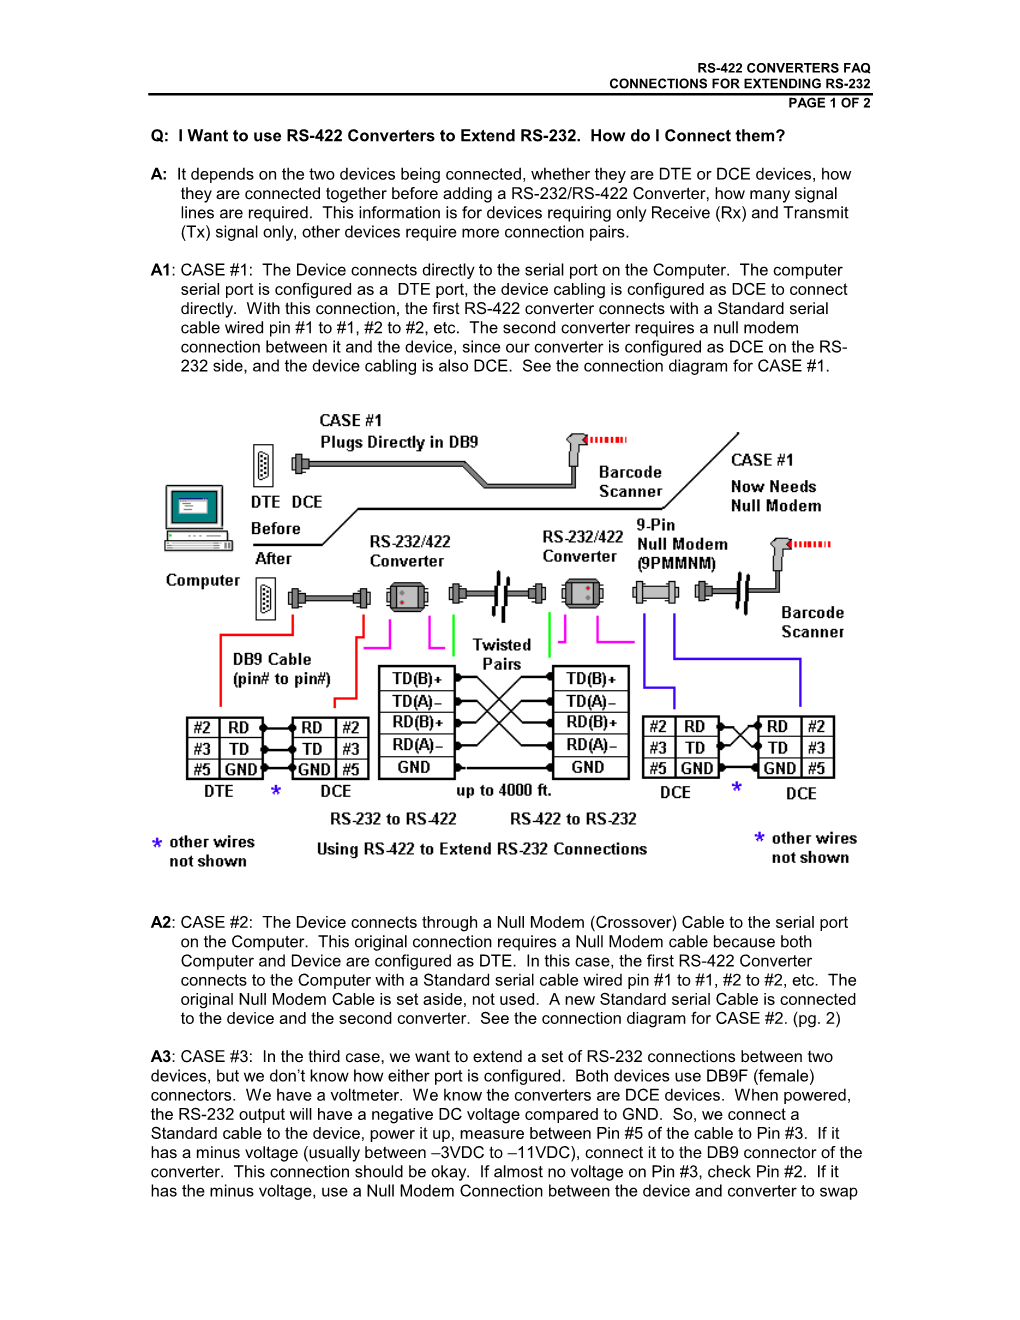 Rs-422 Converters Faq Connections for Extending Rs-232 Page 1 of 2